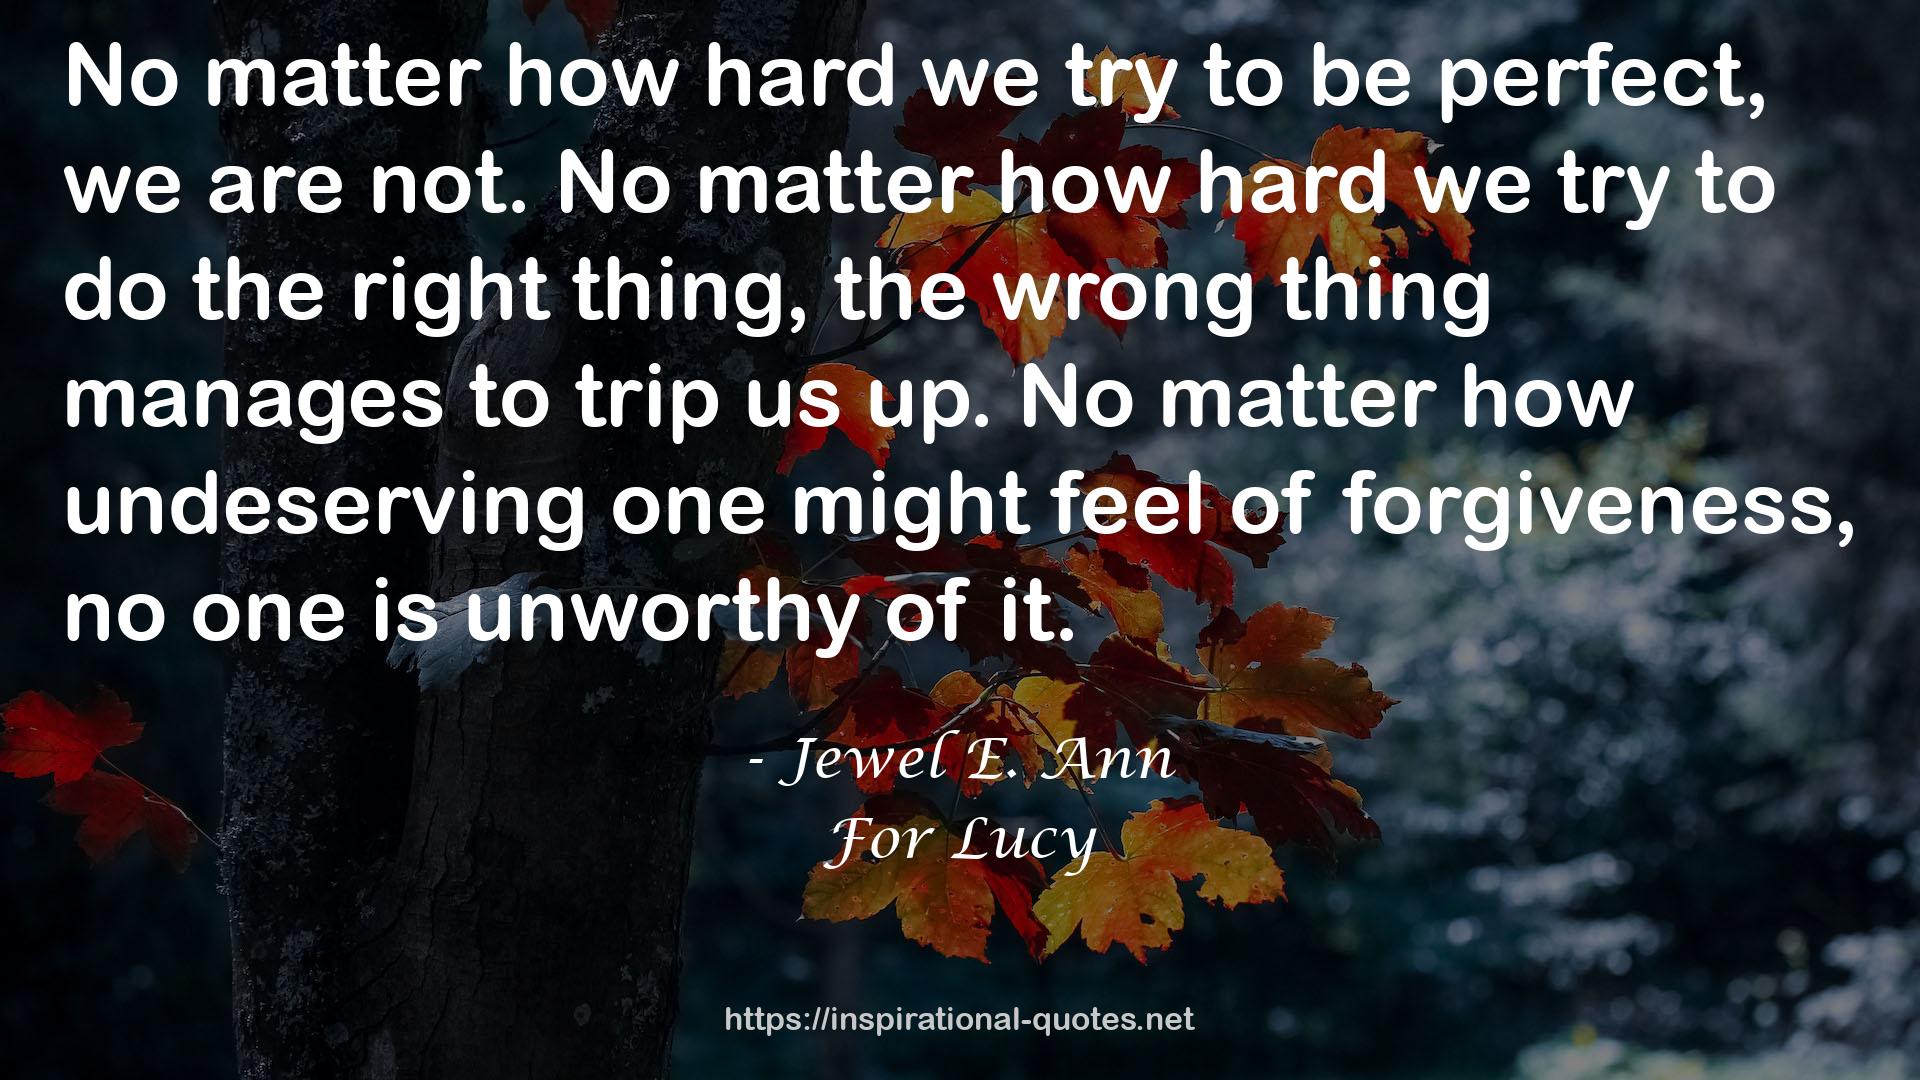 For Lucy QUOTES